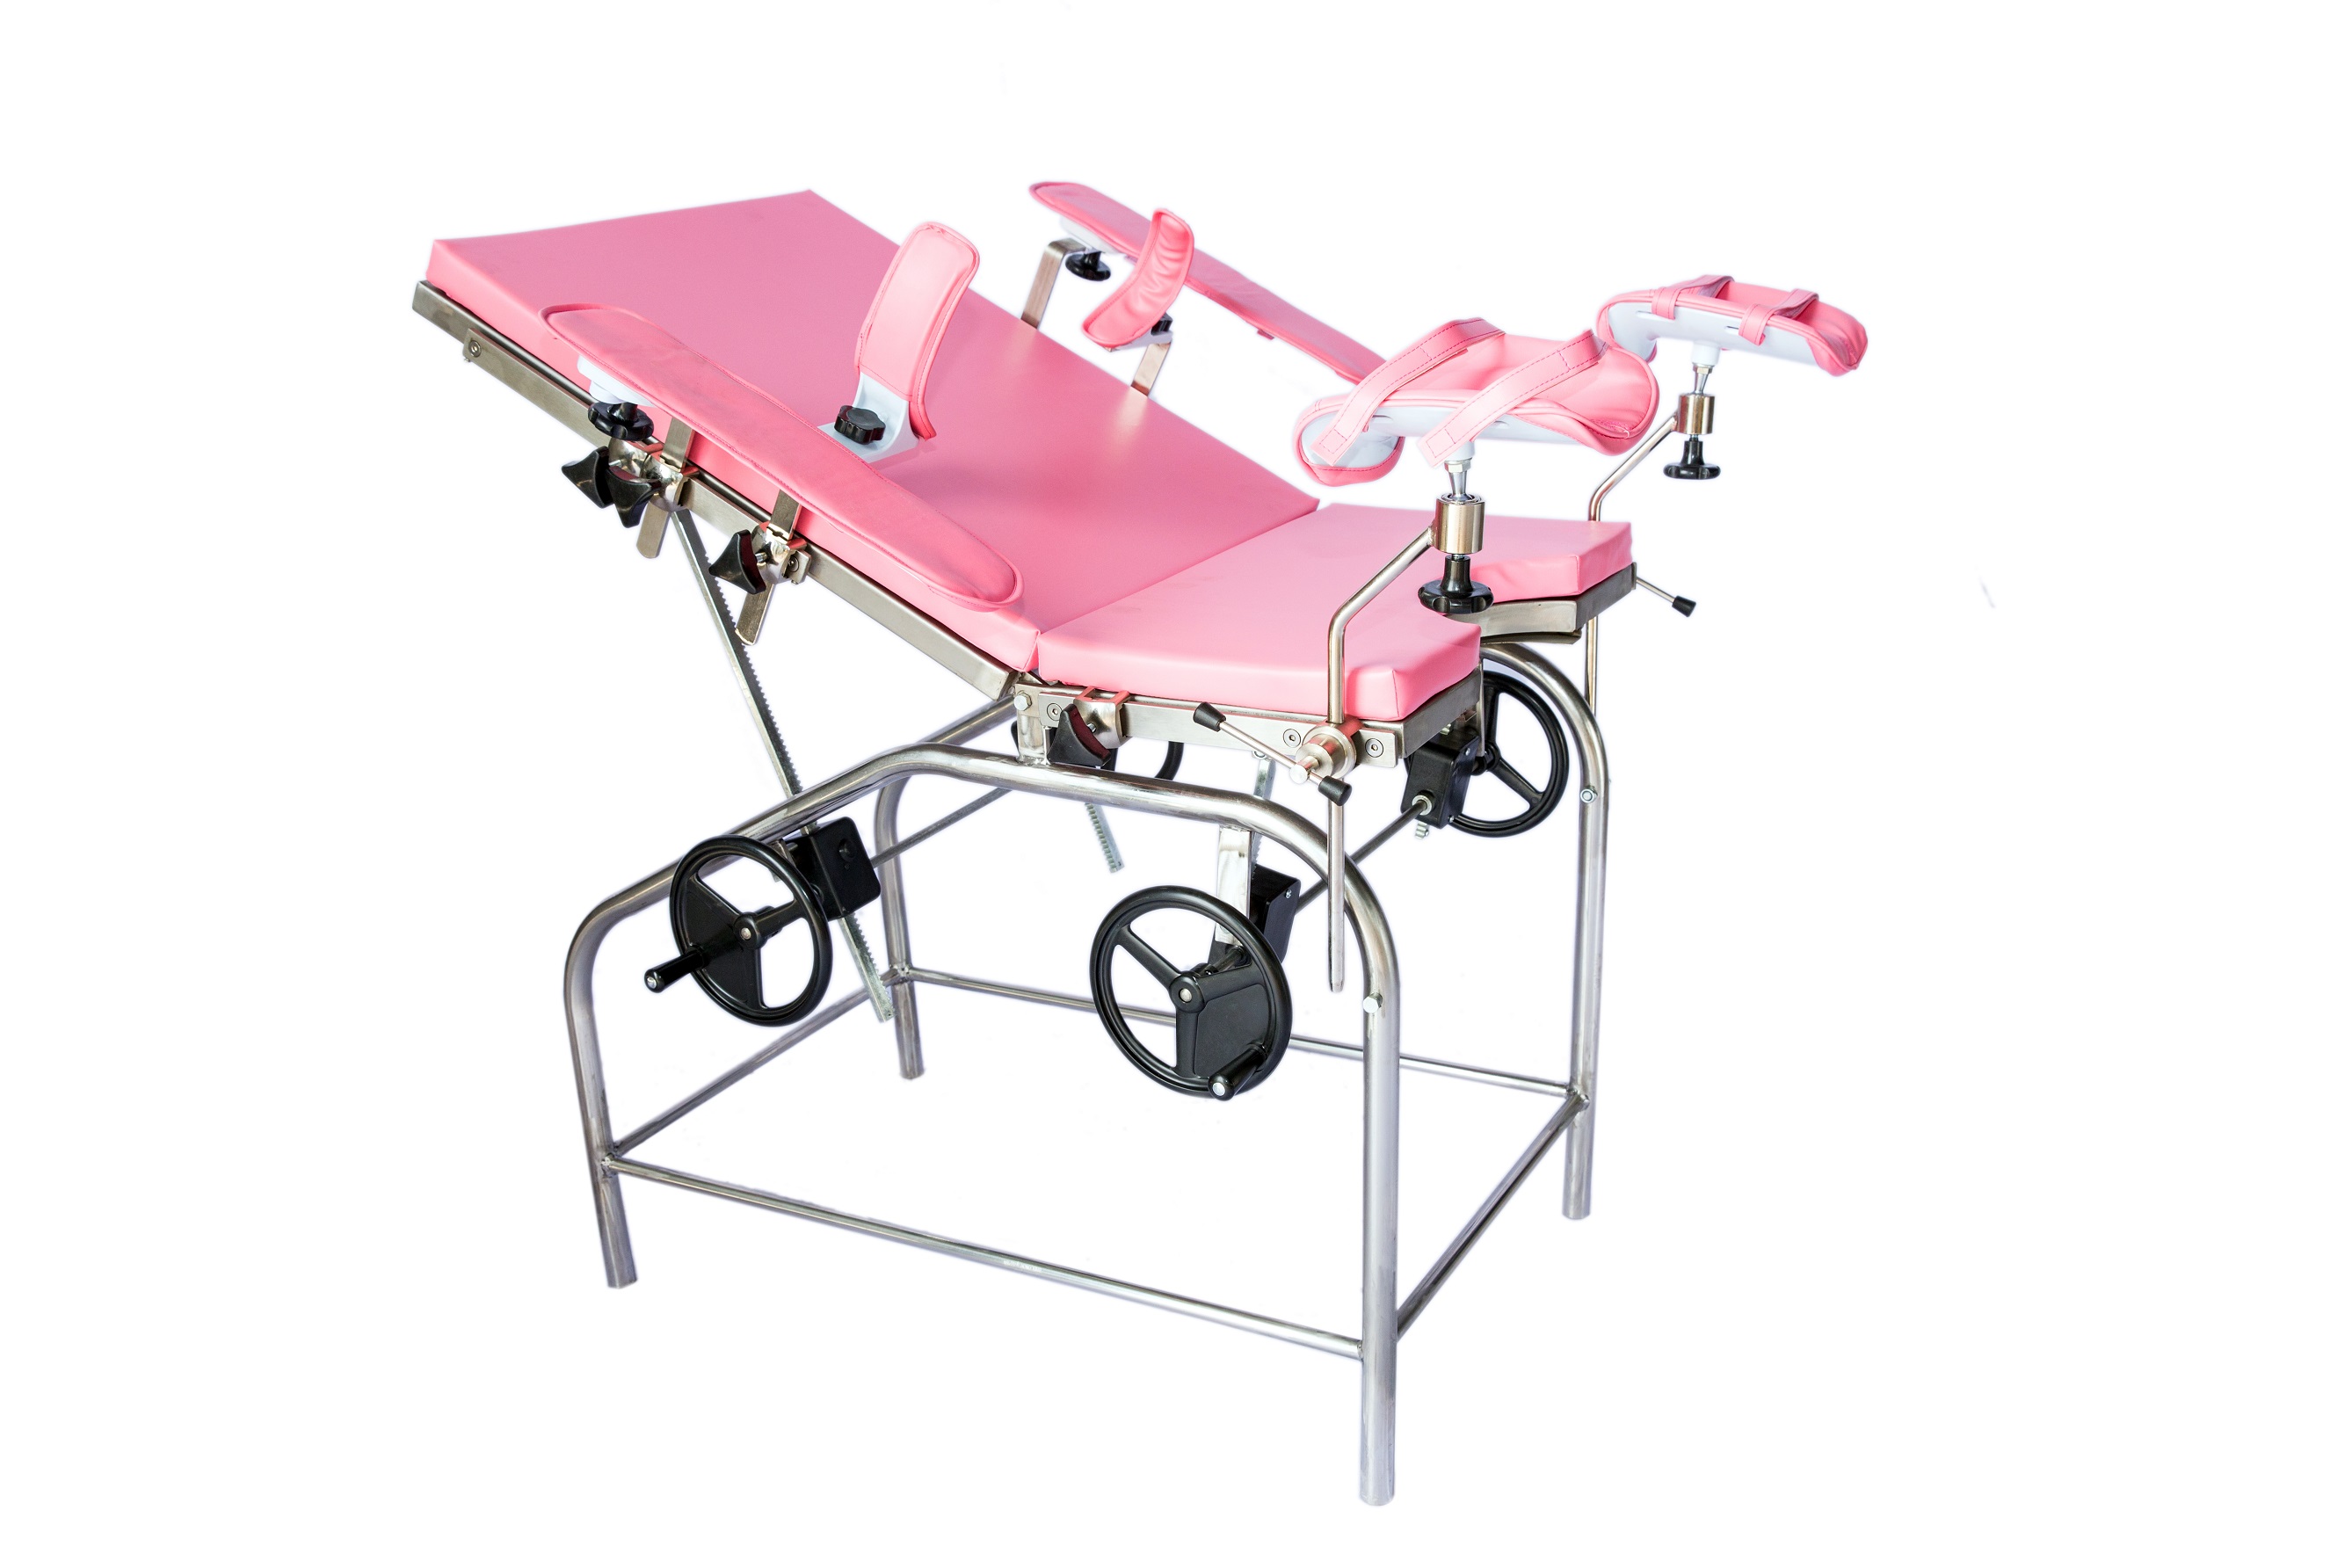 Delivery Table Obstetric Cheap Medical Obstetric Examination Manual obstetric bed Common Manual Delivery Bed